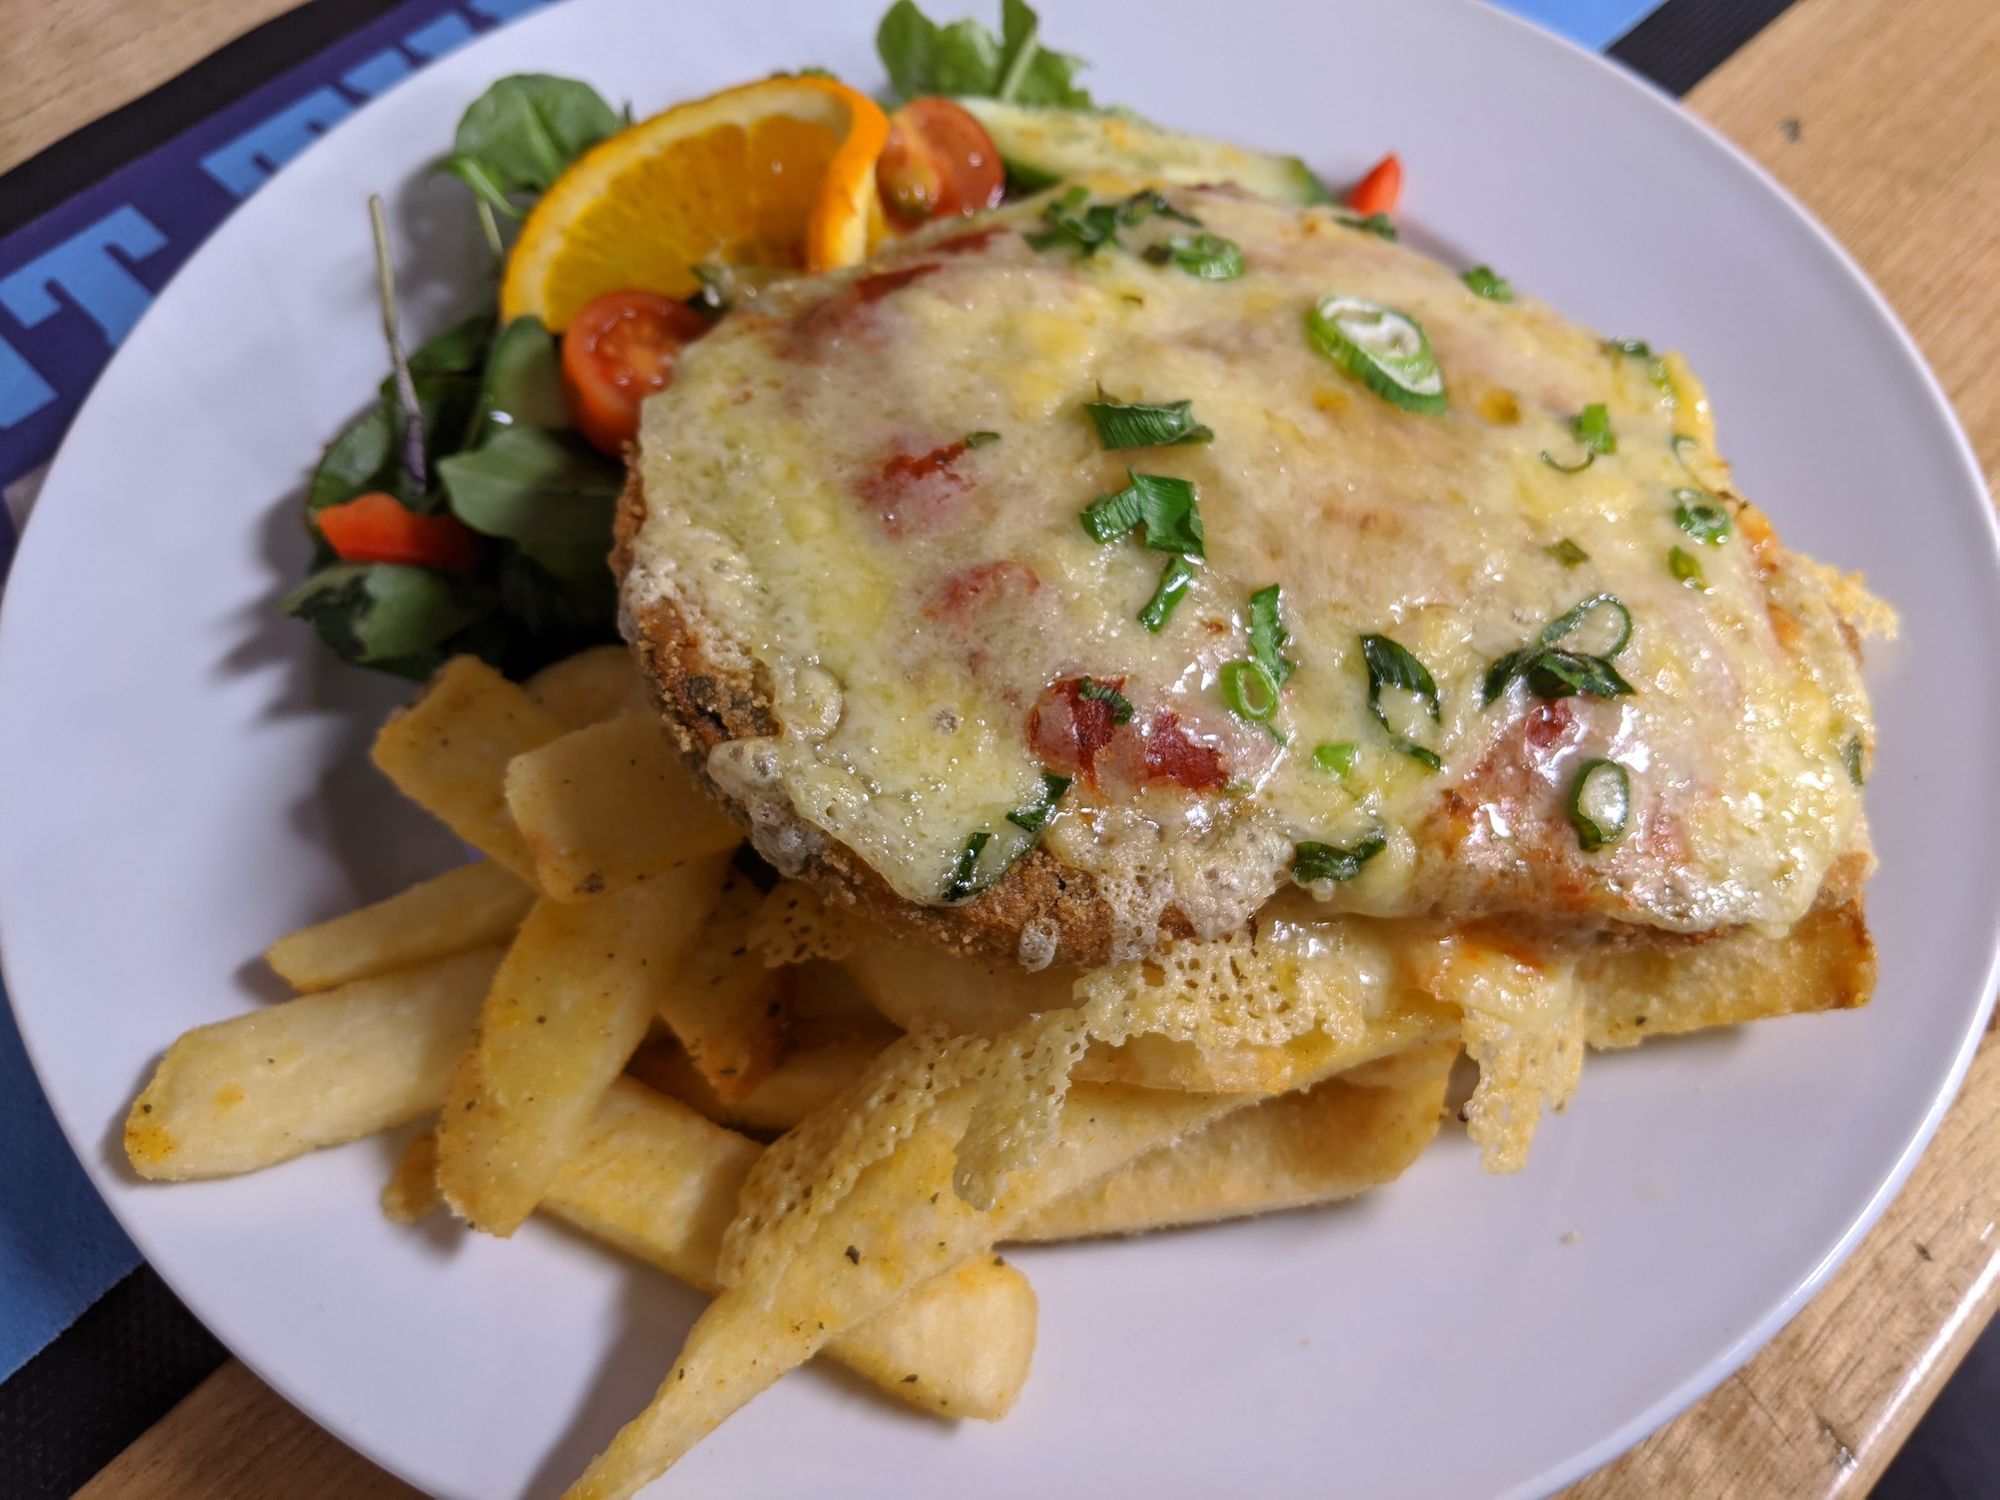 Vegetarian Parmigiana on plate with salad and chips.